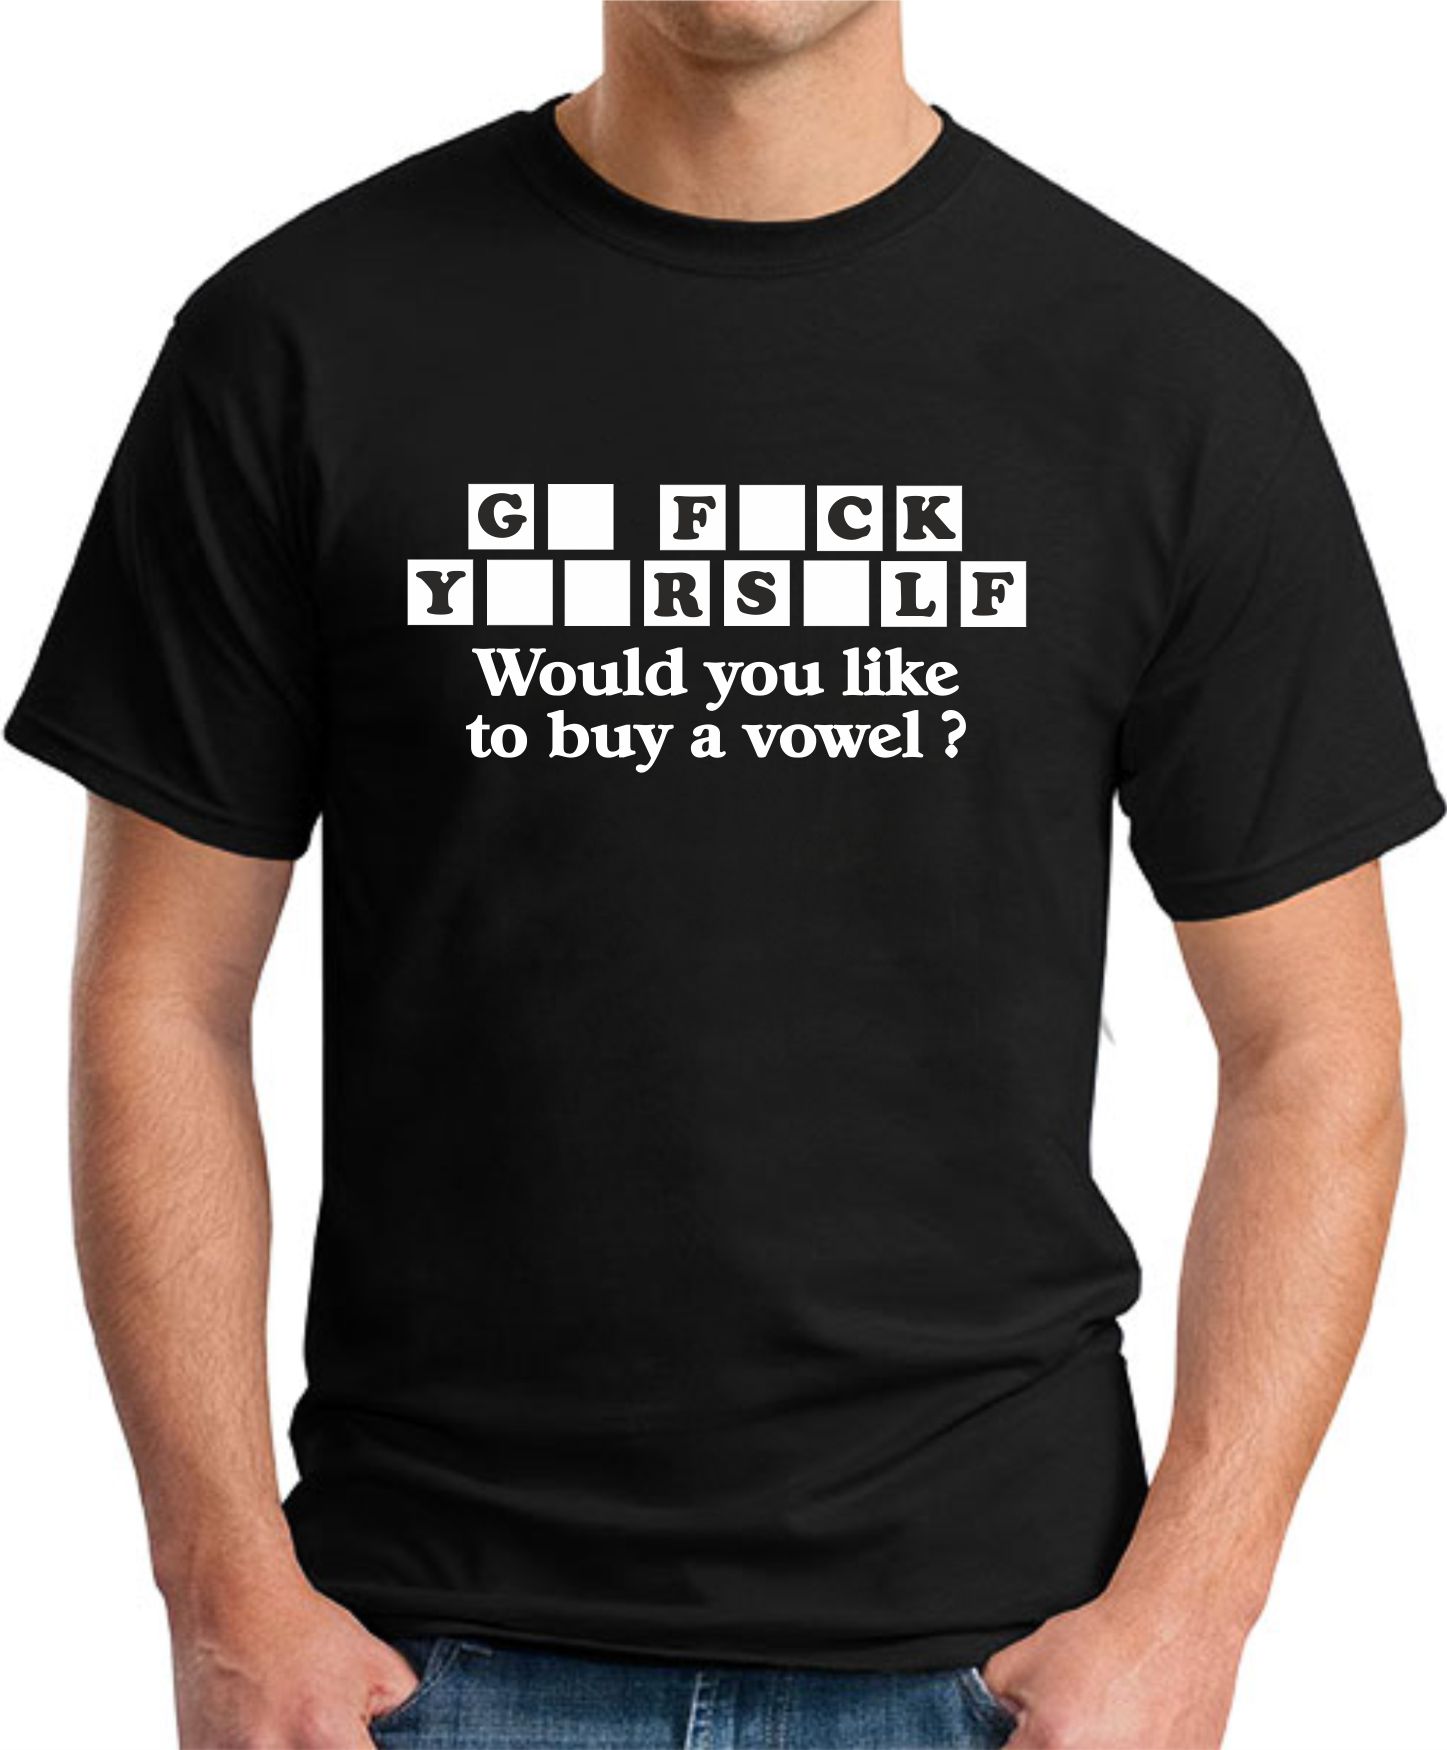 WOULD YOU LIKE TO BUY A VOWEL? black